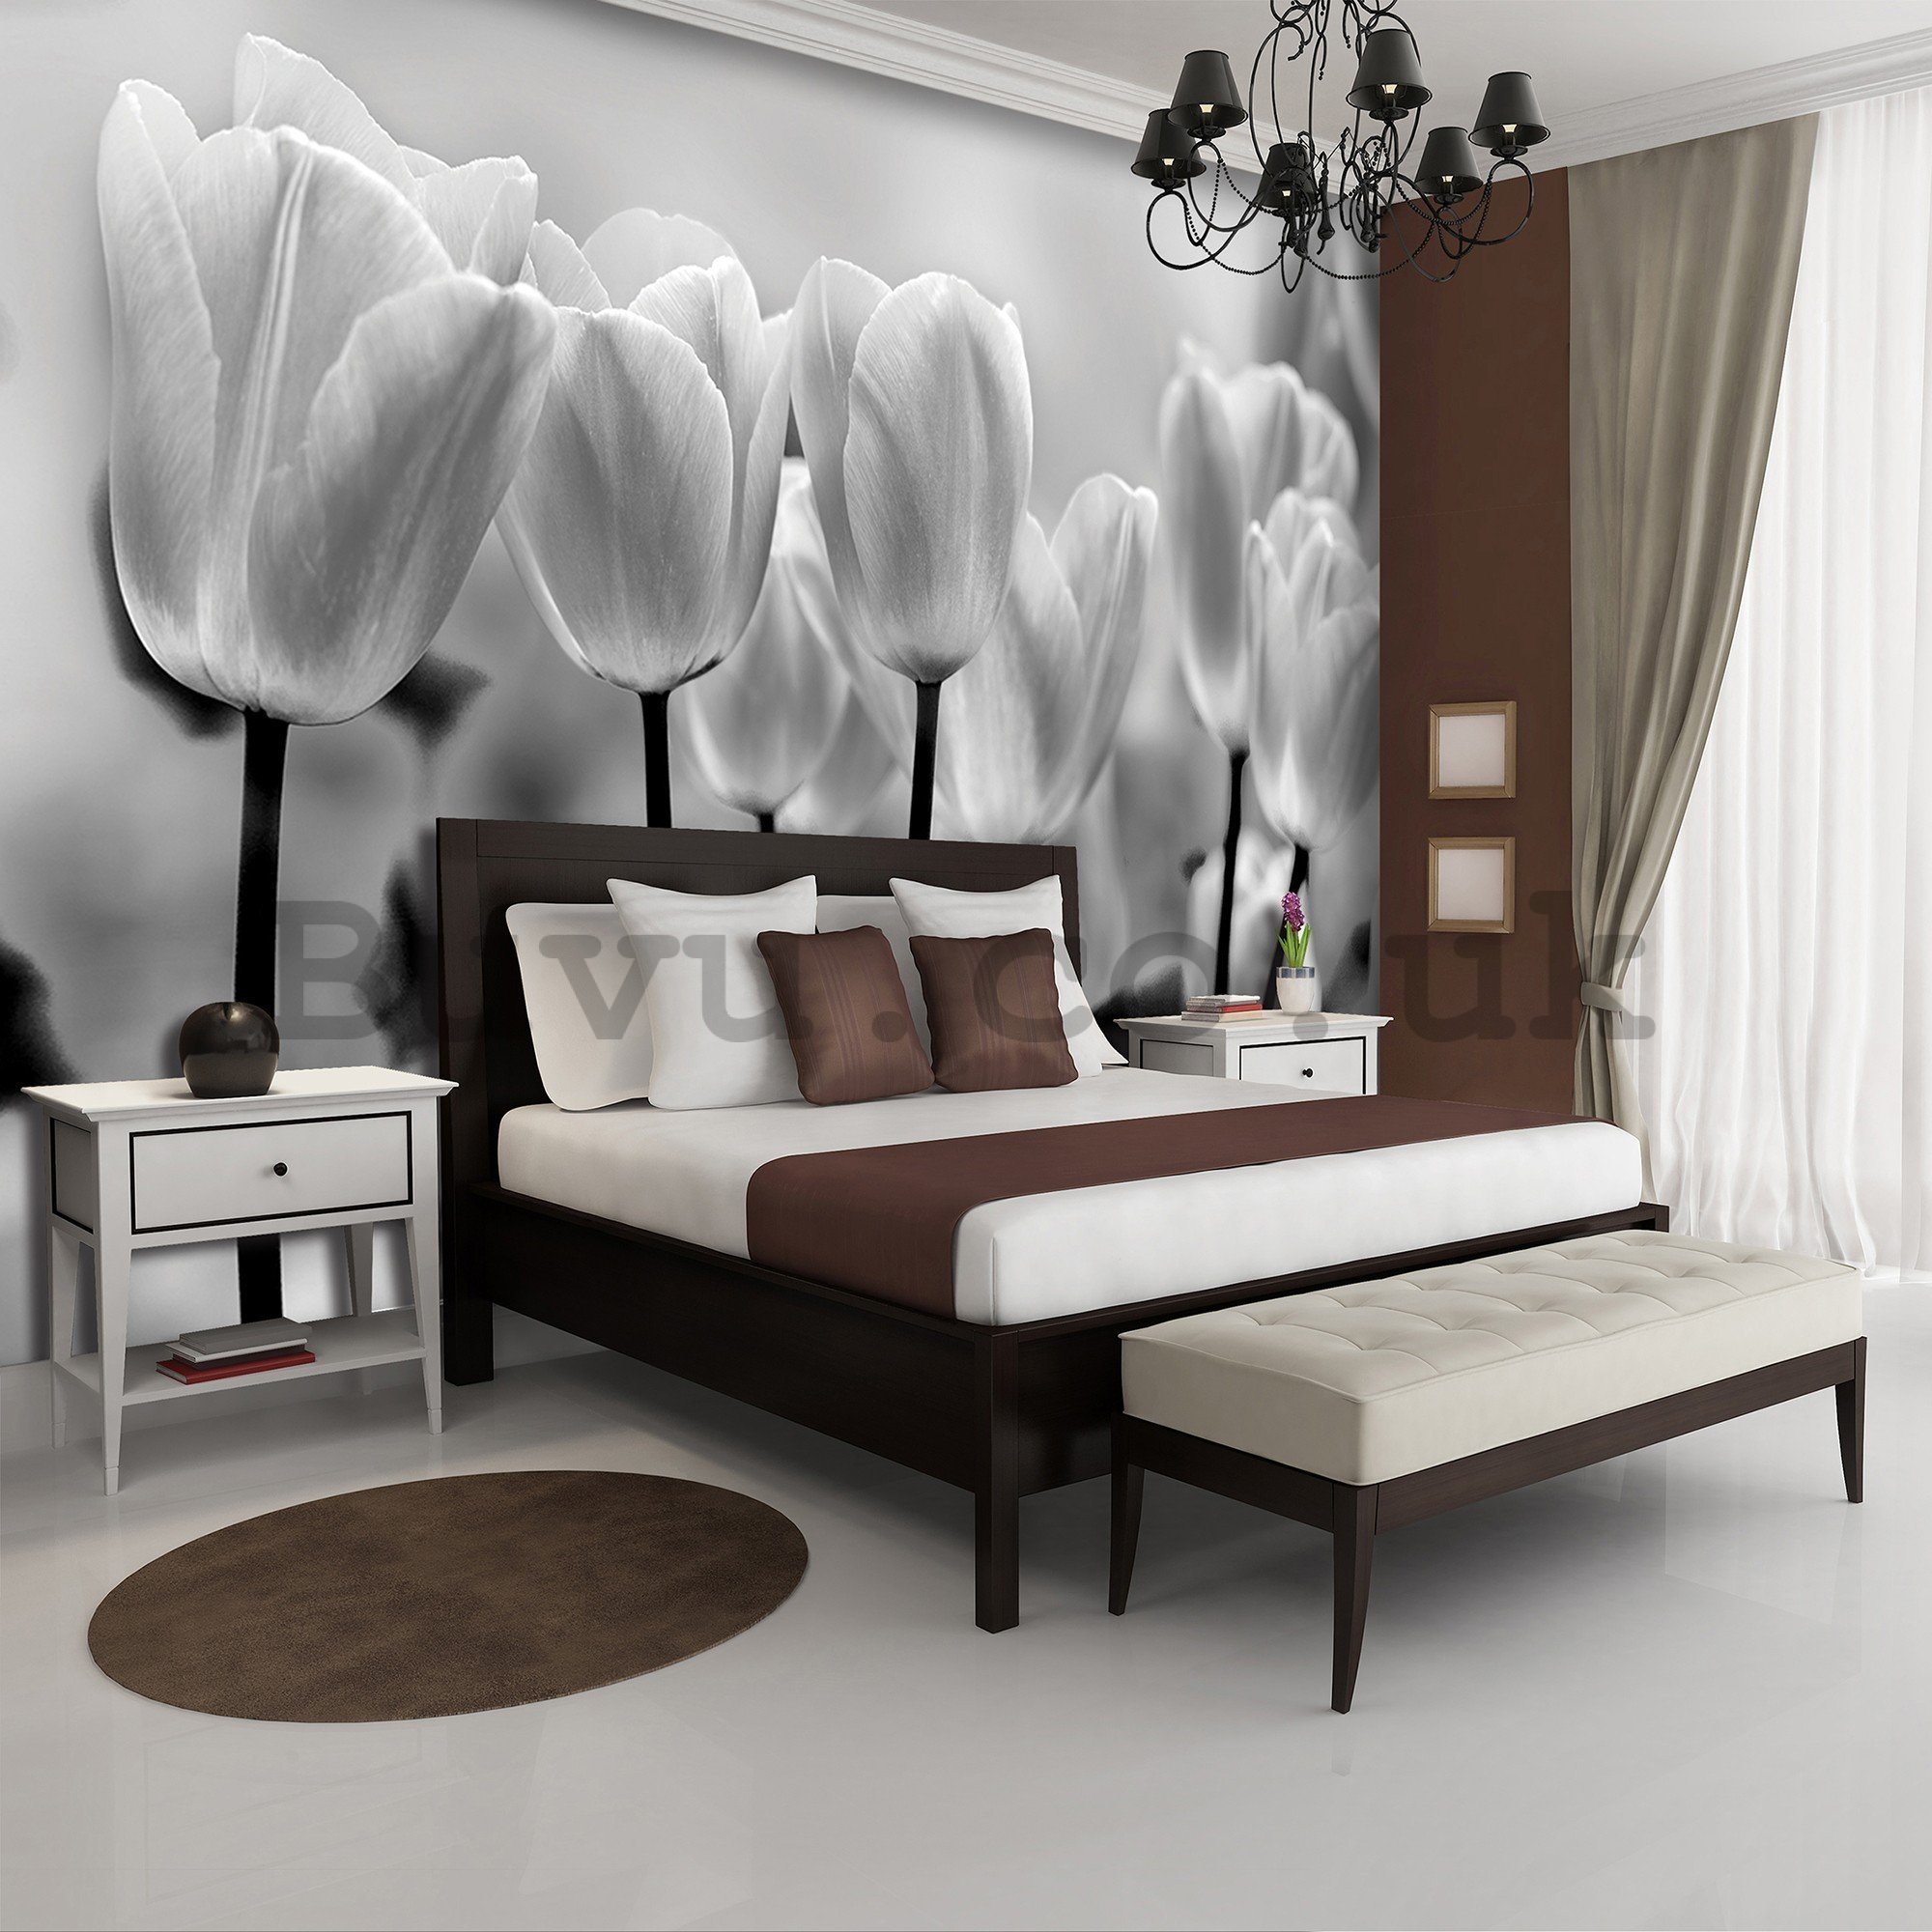 Wall mural vlies: White and black tulips - 416x254 cm